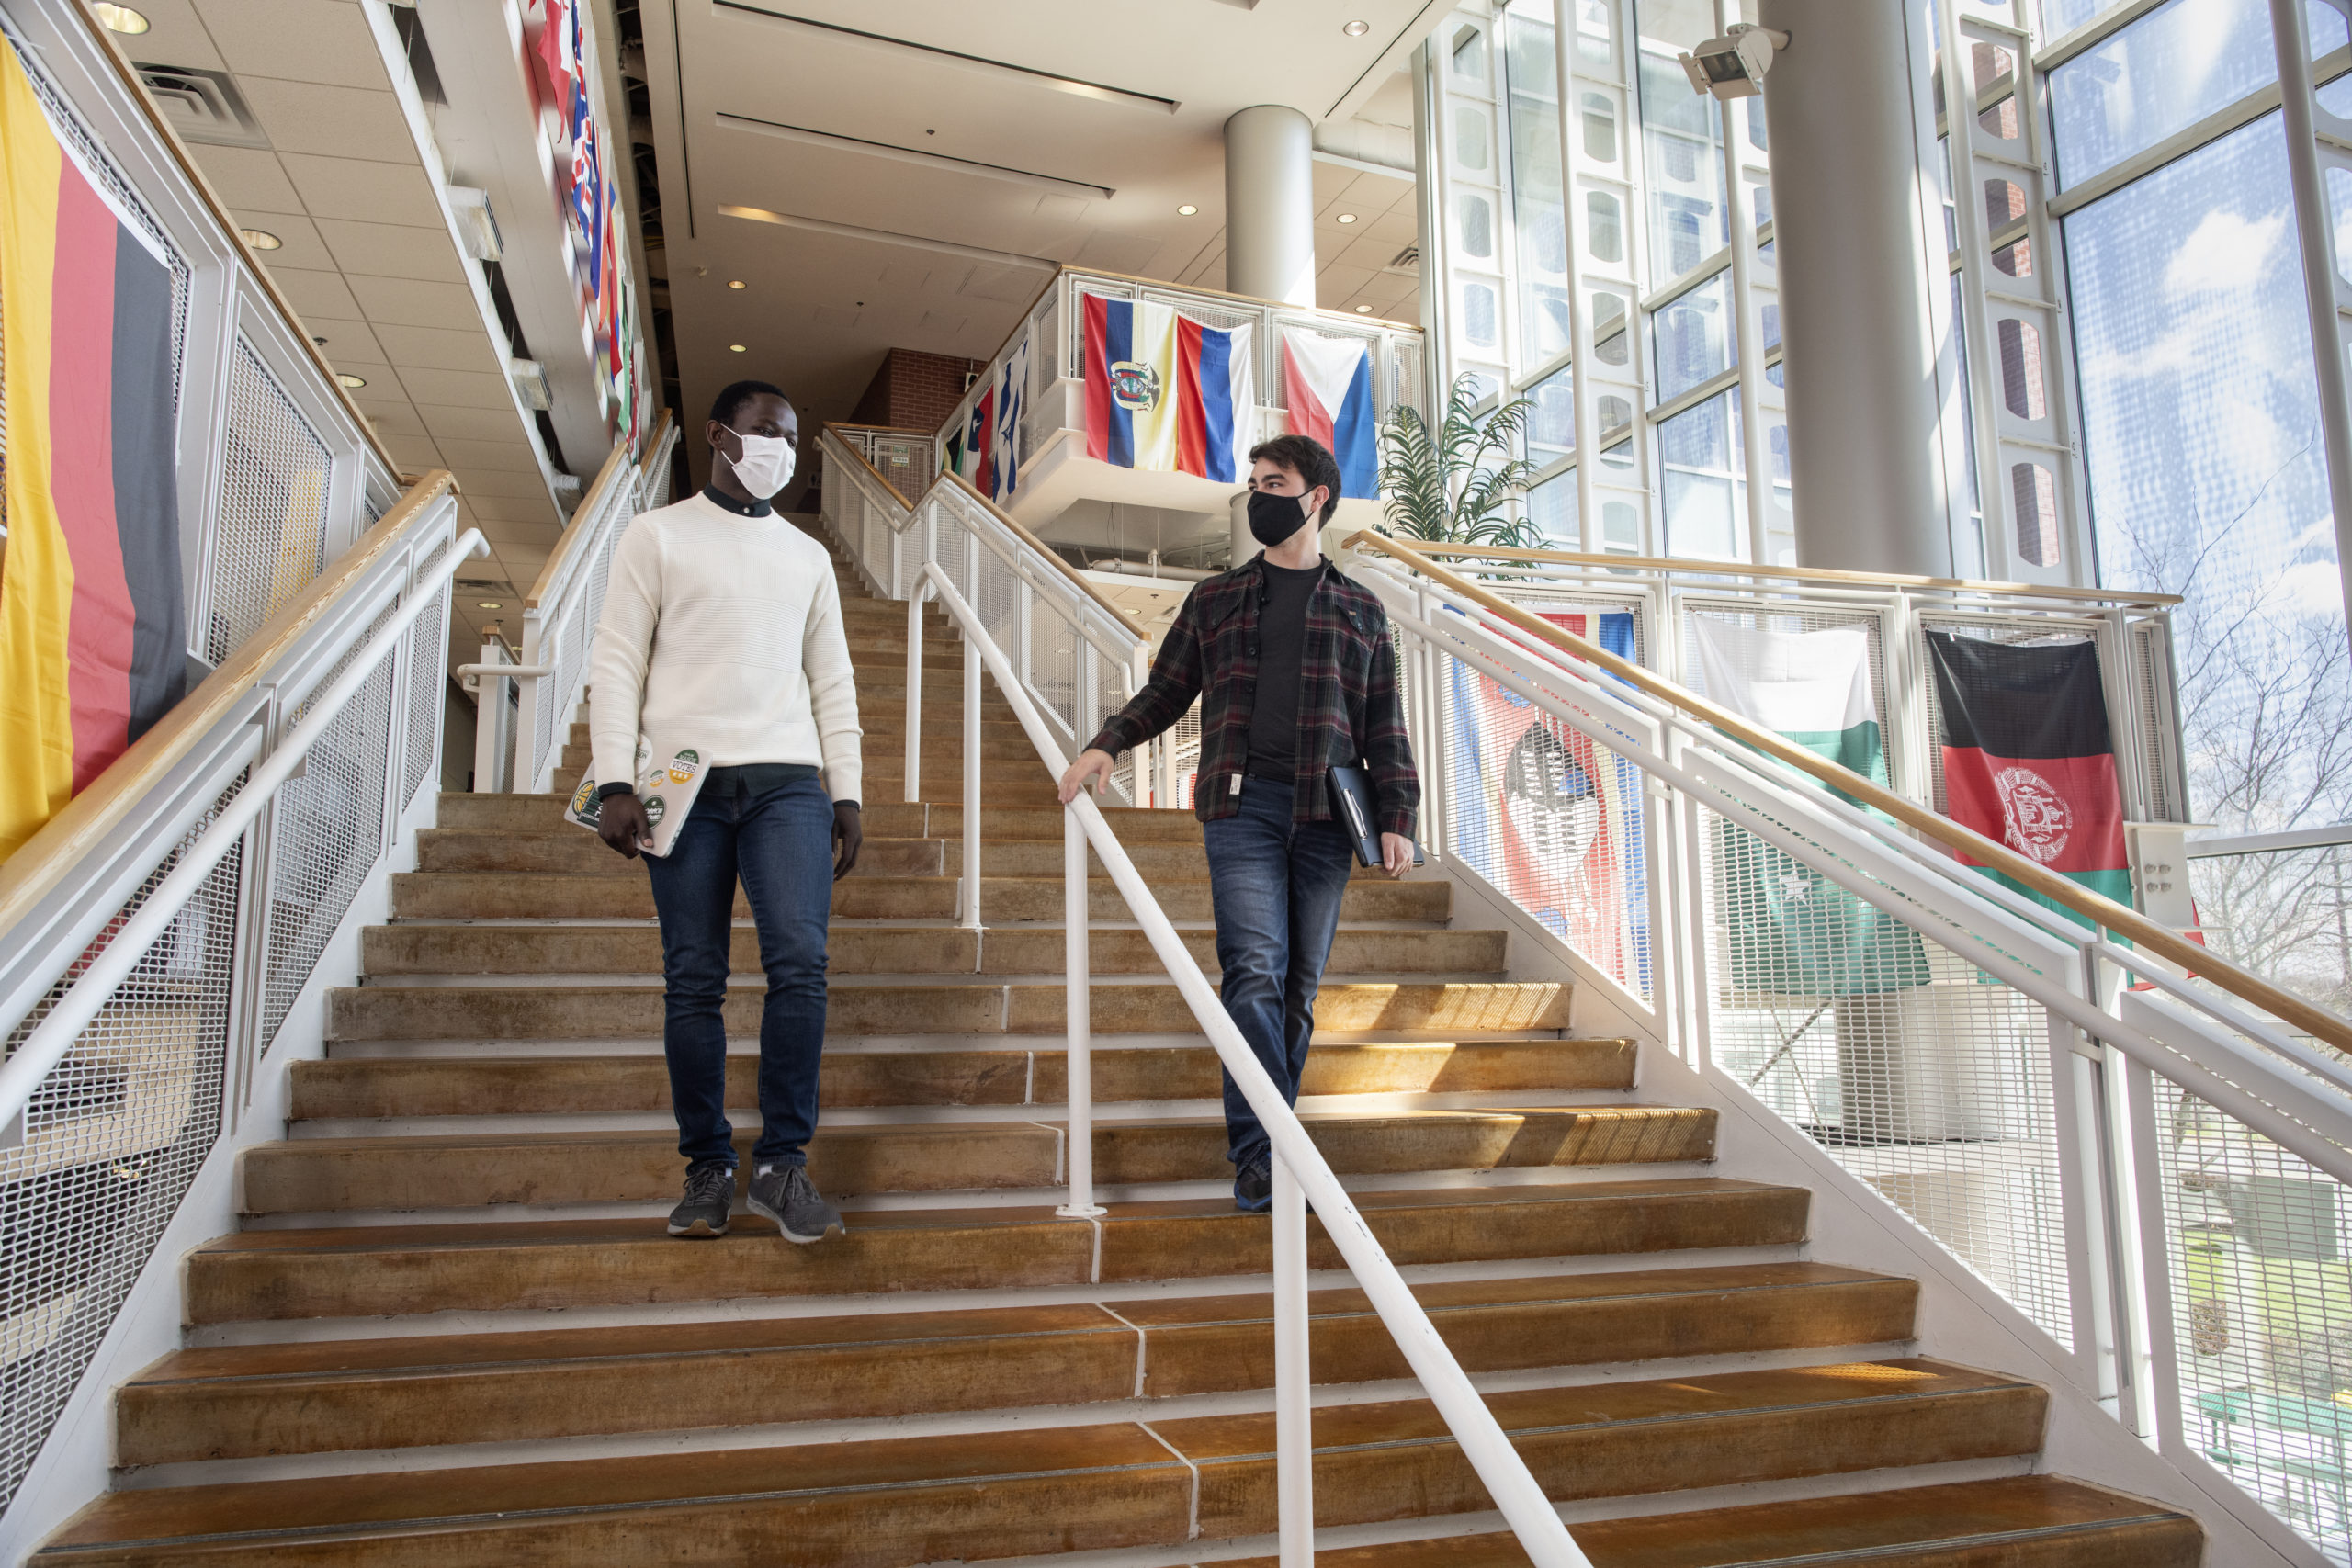 Graduate students walking to class in Katherine Johnson Hall on the Science and Technology Campus. Photo by Evan Cantwell/Creative Services